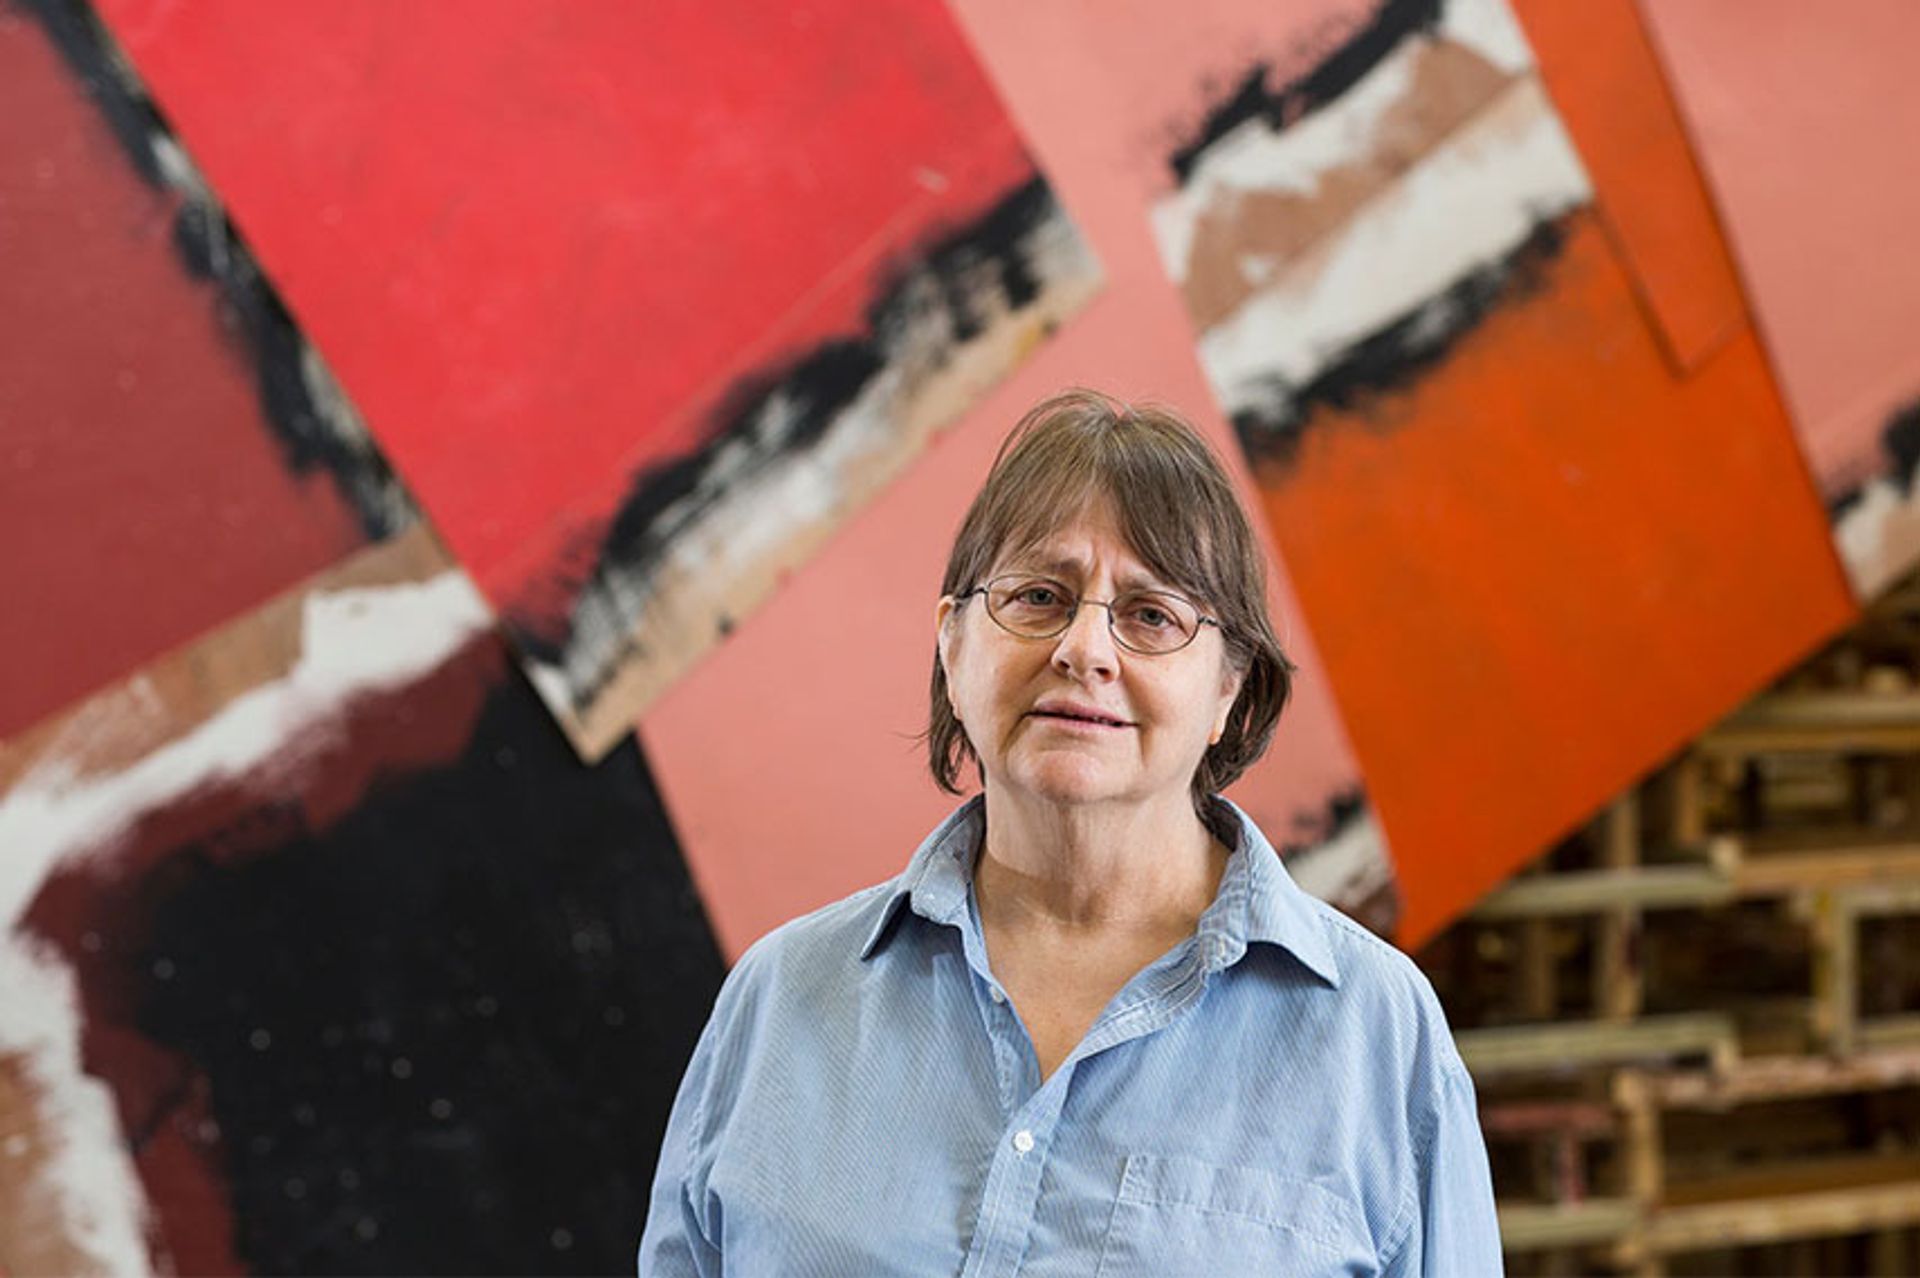 "The 'youngest-minded' of senior artists": Phyllida Barlow in 2017 David Levene; courtesy of Hauser & Wirth